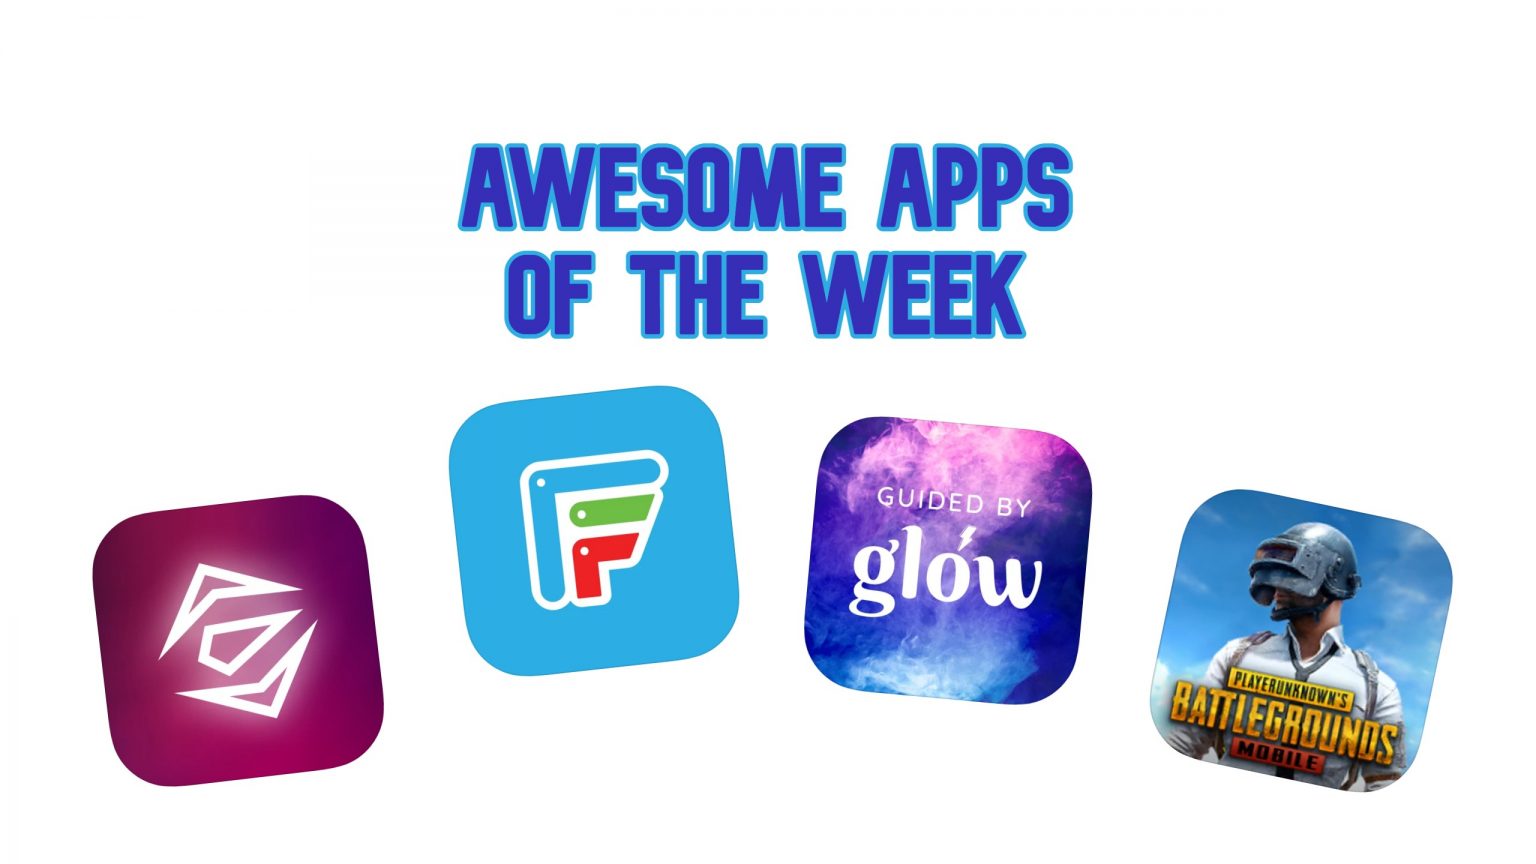 Blast off with space games and female erotica [Awesome Apps of the Week]